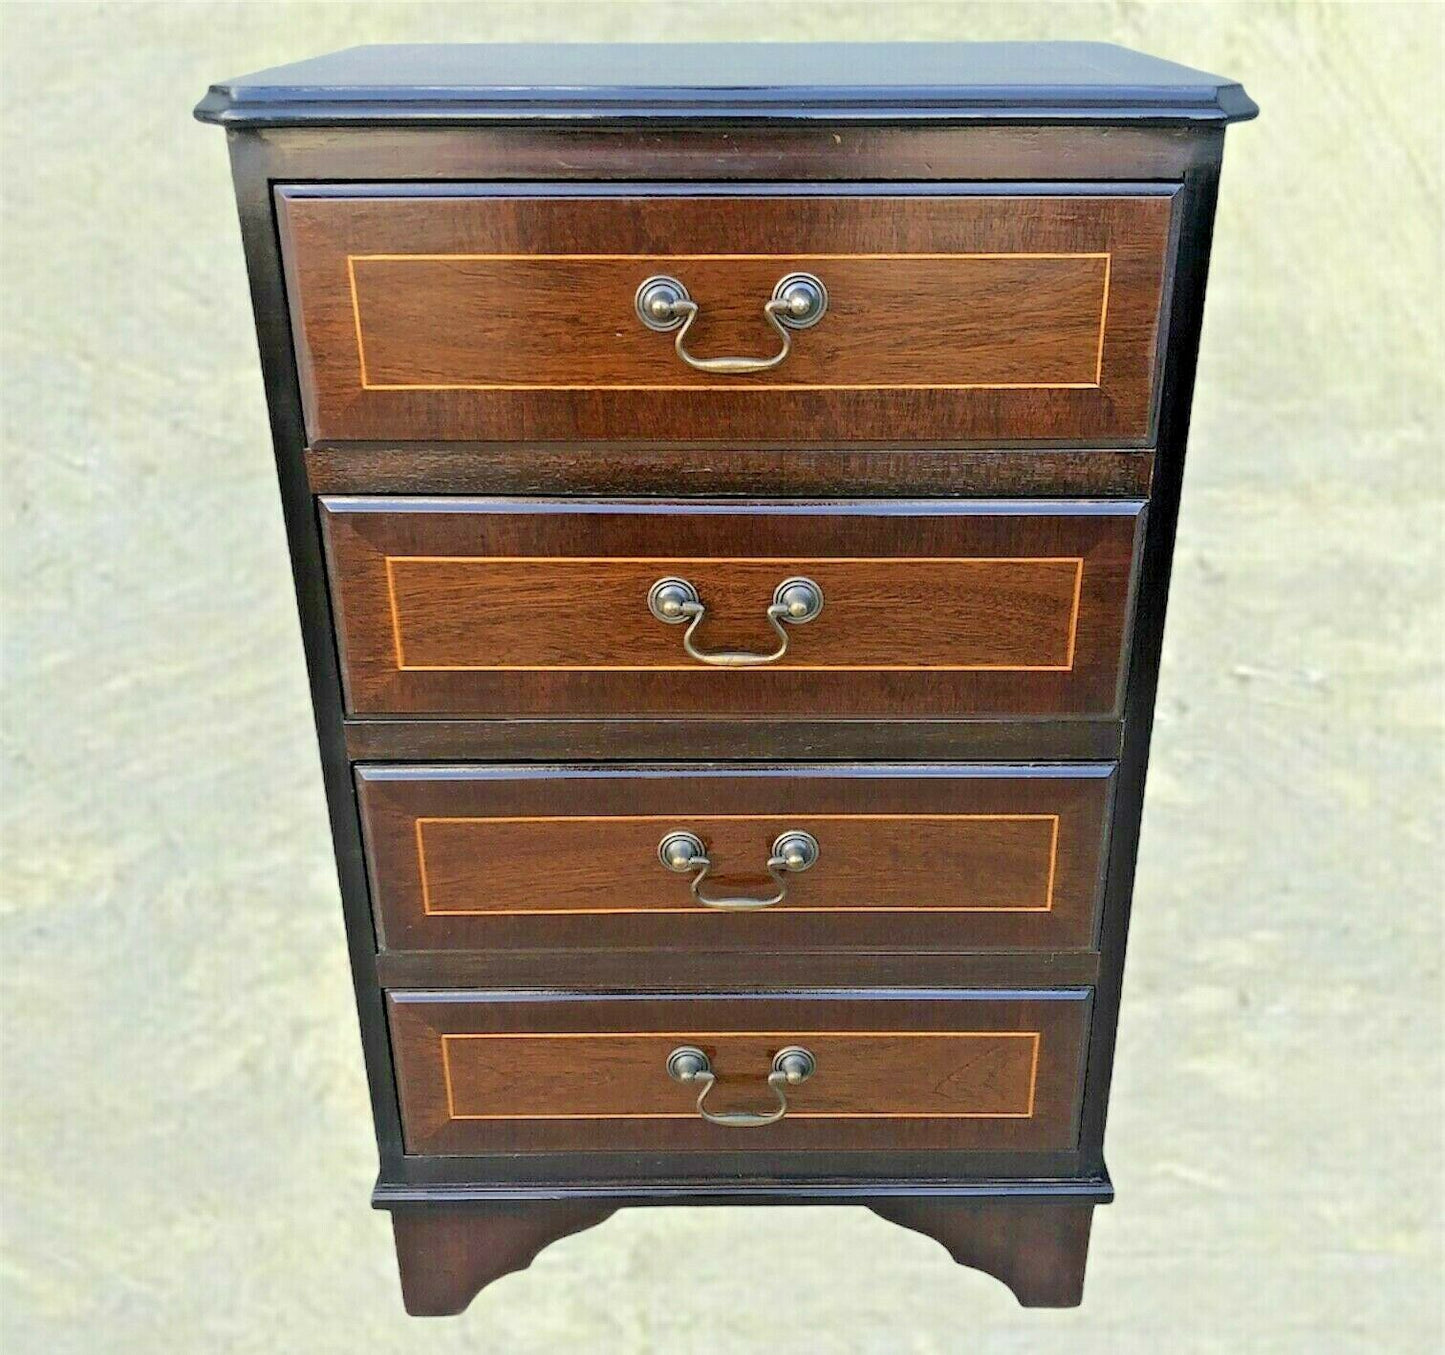 Handsome Pair Of Vintage Mahogany Bedside Chests ( SOLD )